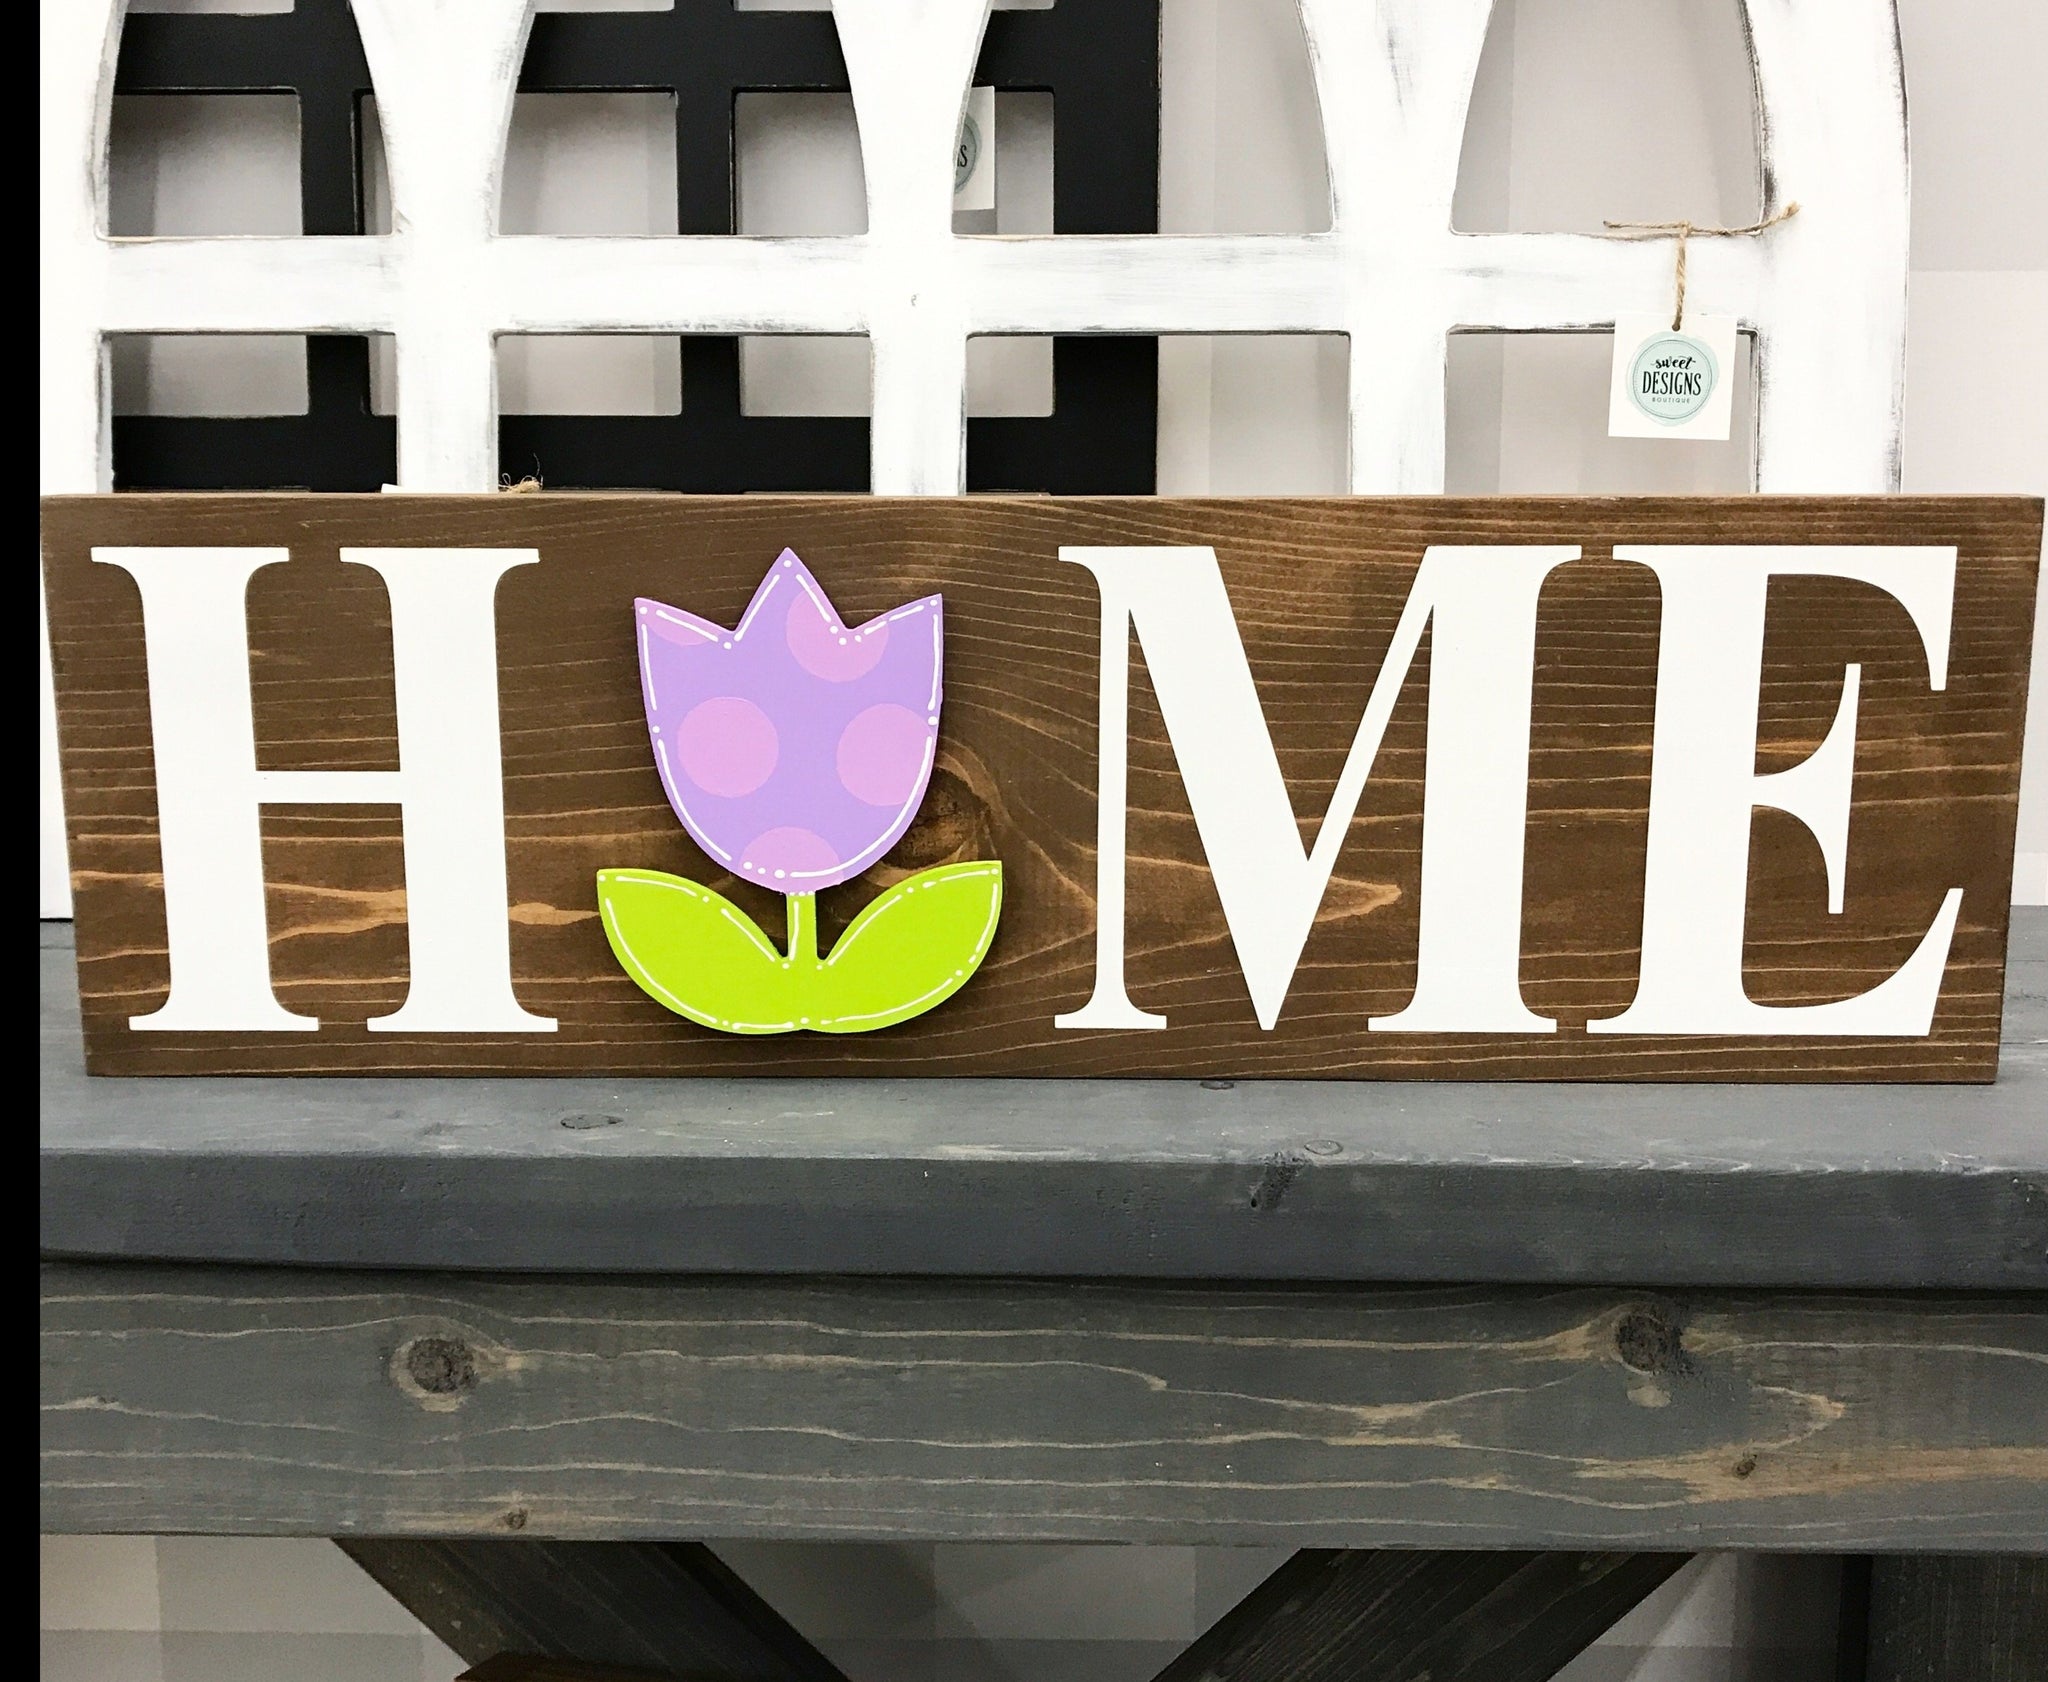 INTERCHANGEABLE HOME SIGN